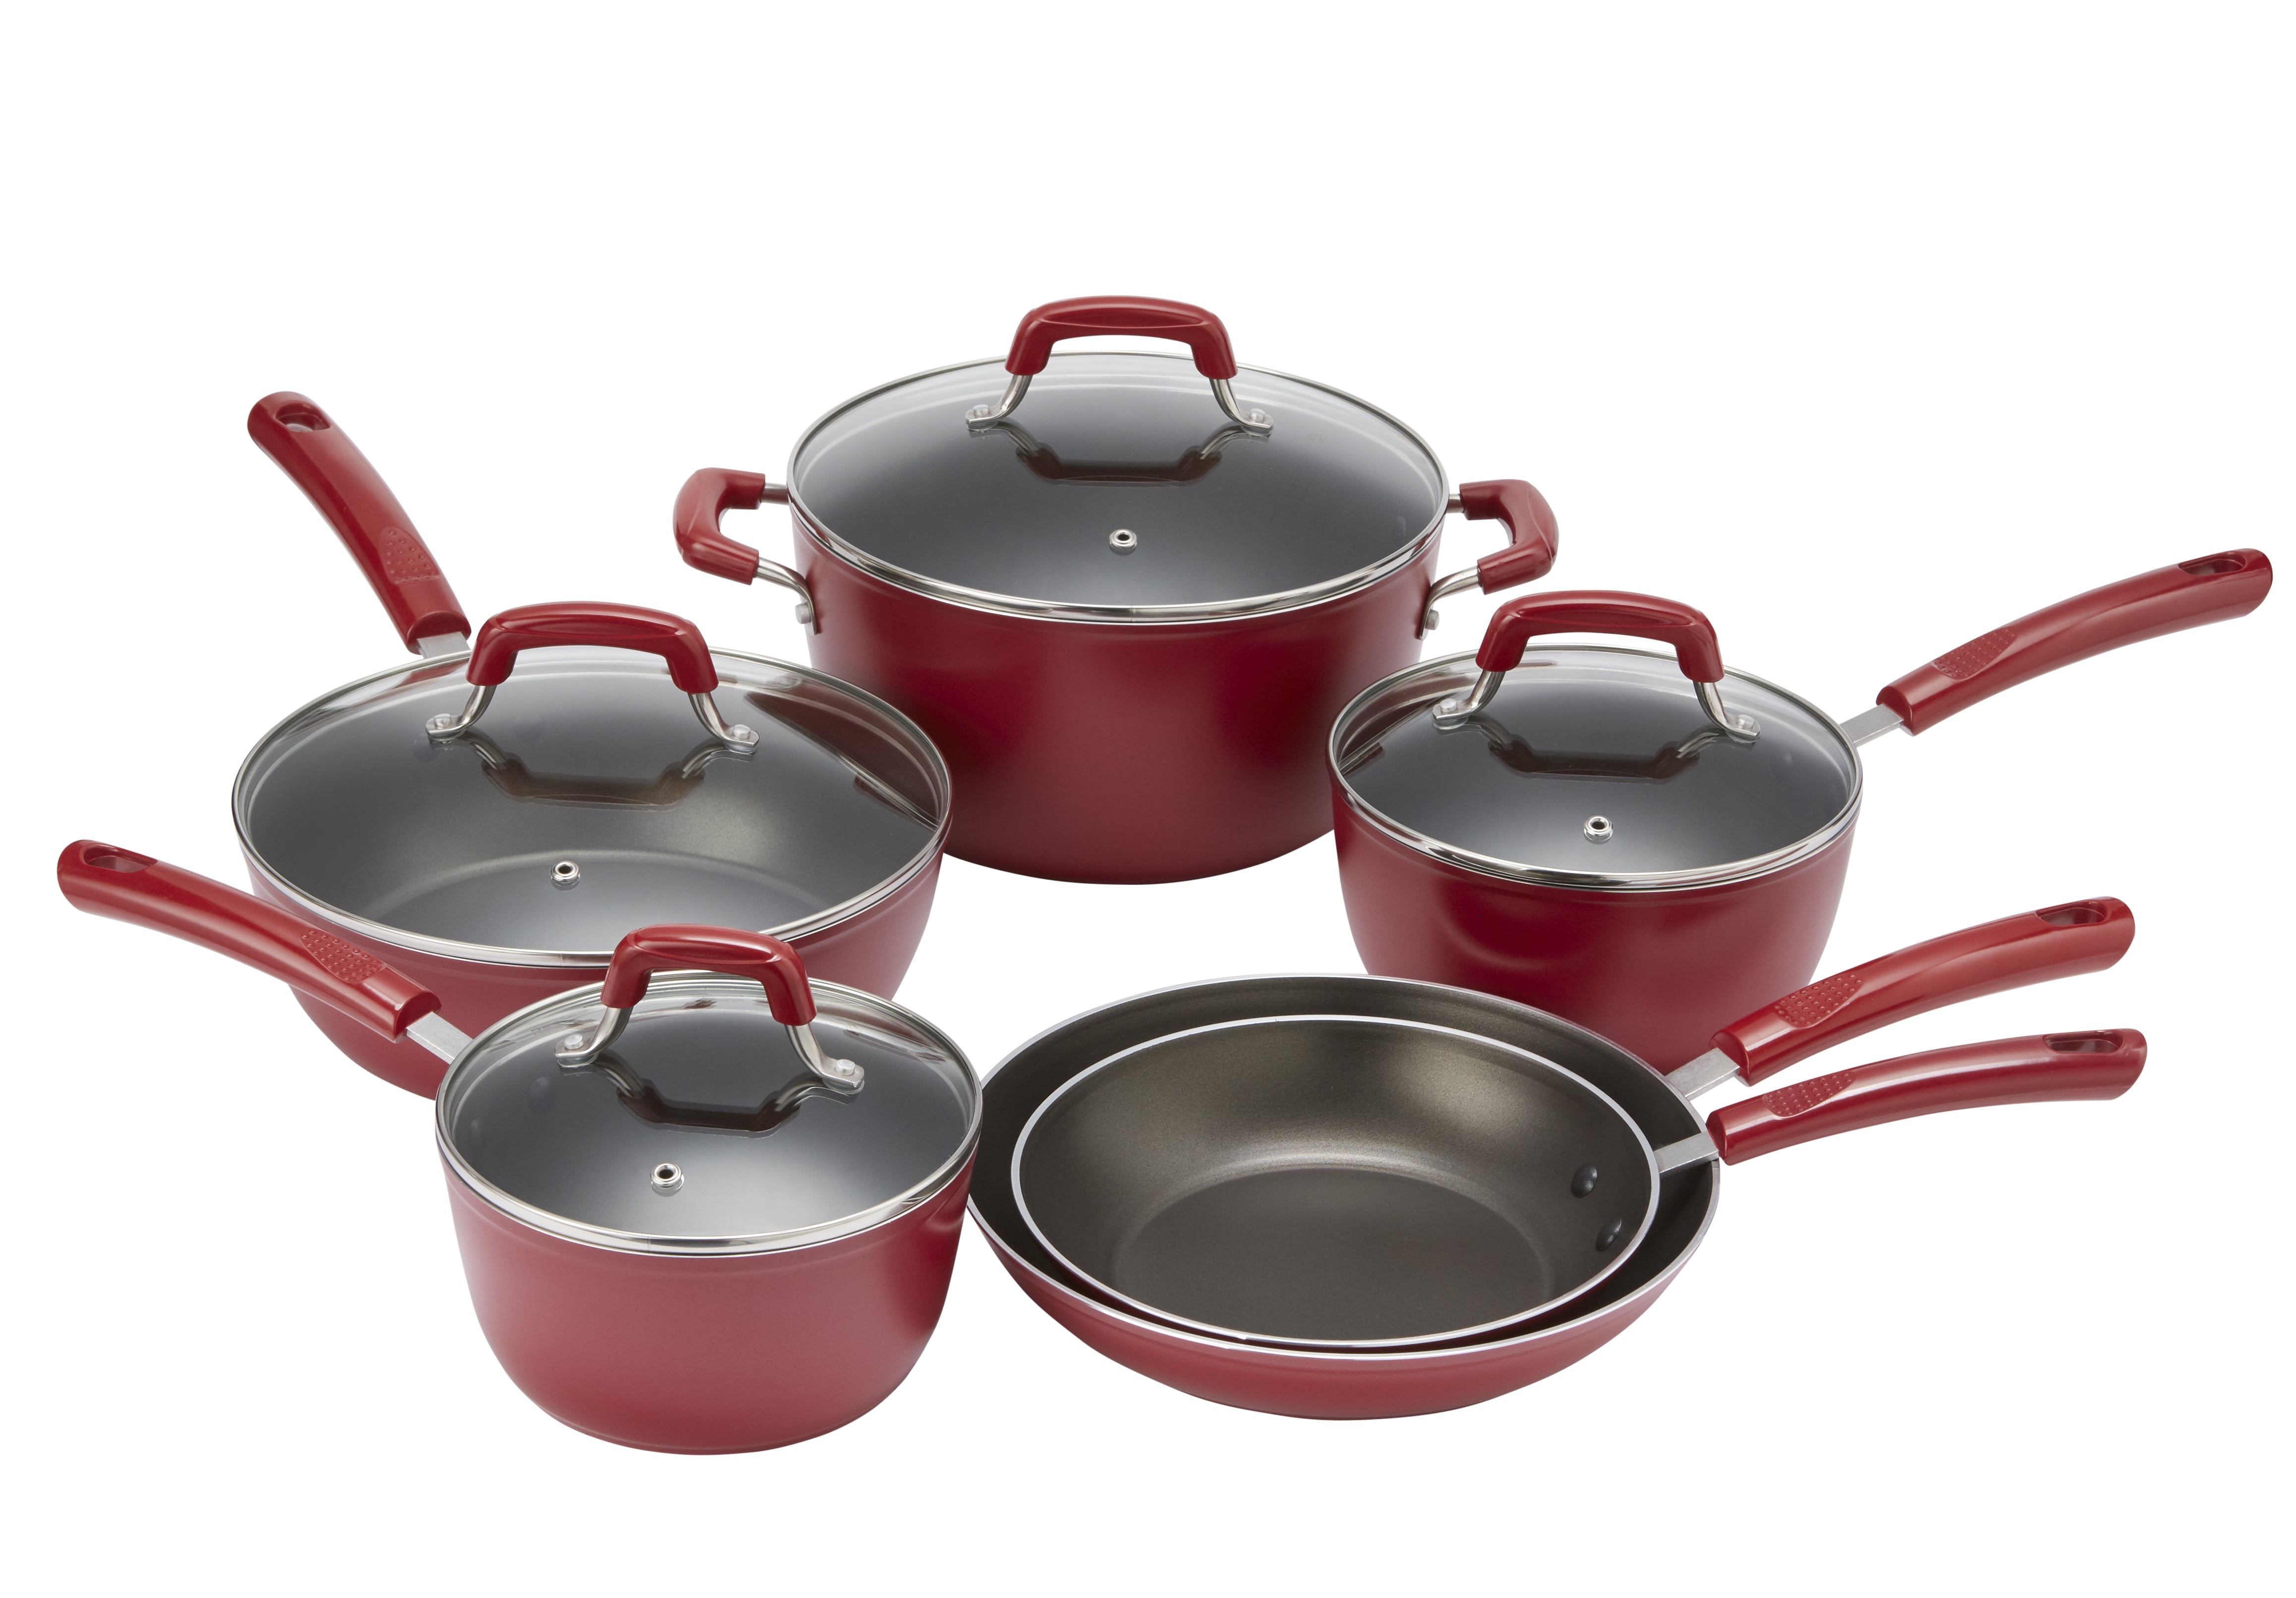 Motase 6-Piece Nonstick Frying Pan Set,Aluminum Cookware with Removable  Handle,Red